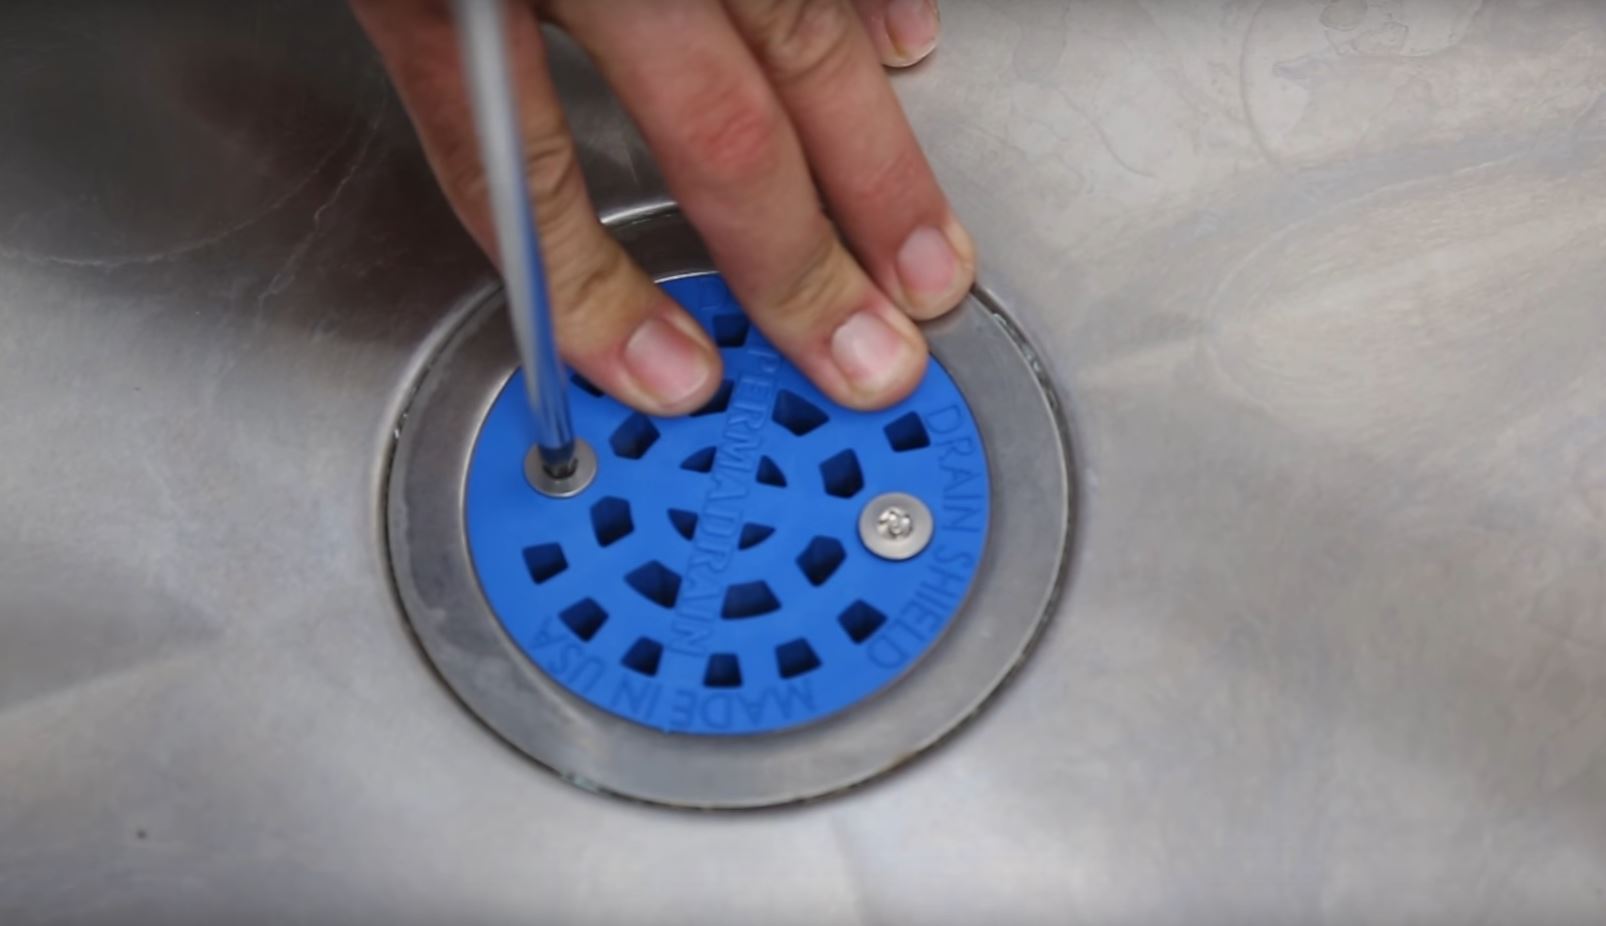 commercial kitchen sink drains with little tub strainer